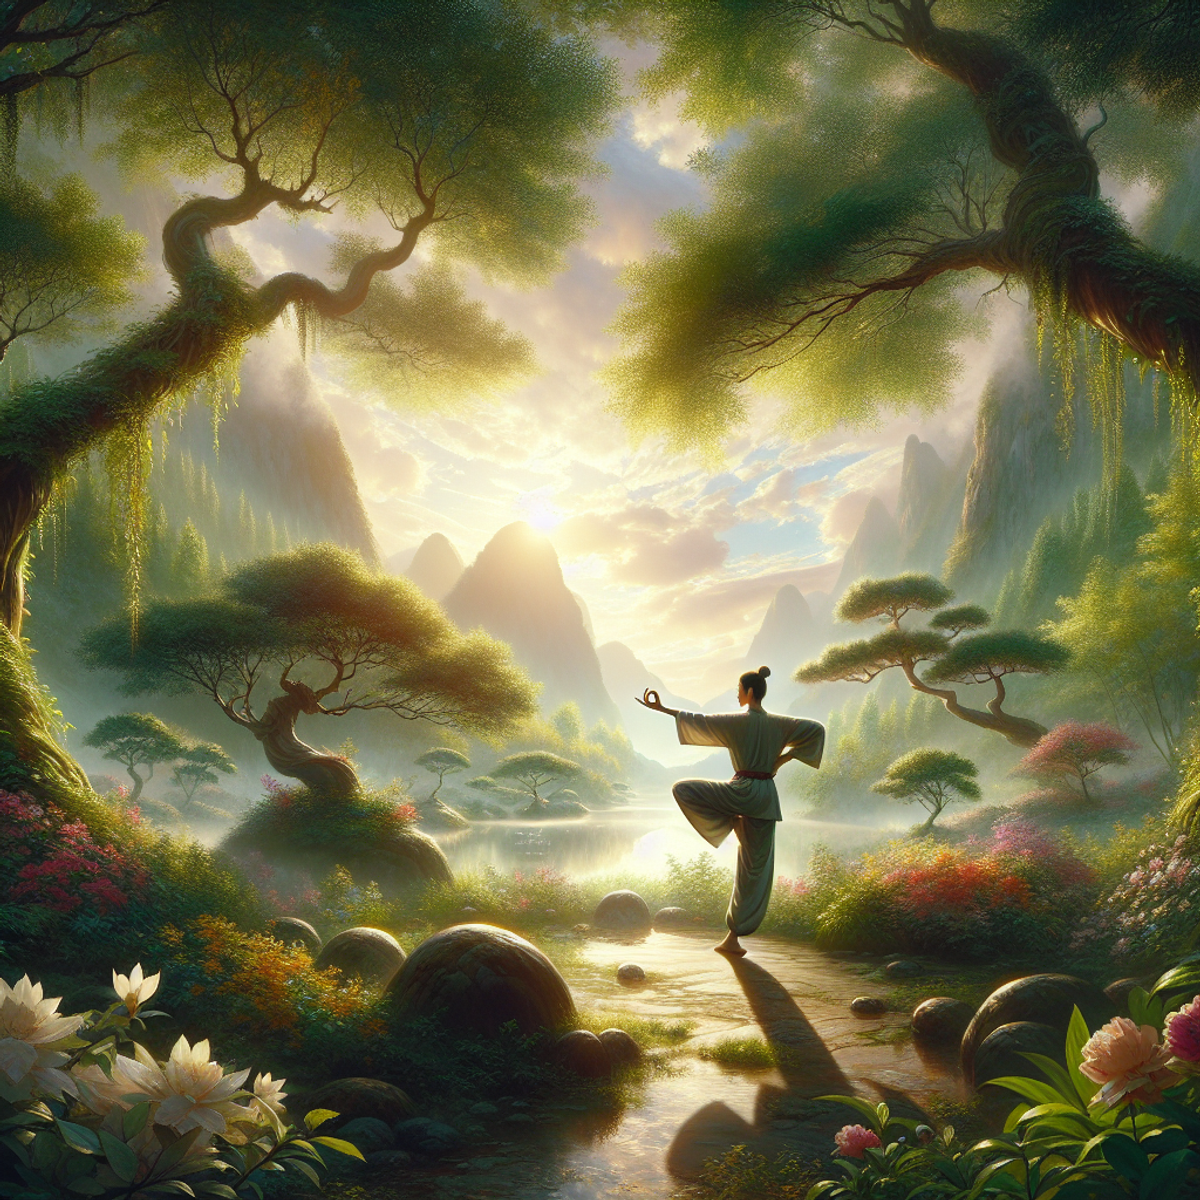 A person practicing yoga, tai chi, and qigong in a serene natural setting with lush greenery, blooming flowers, and towering trees.